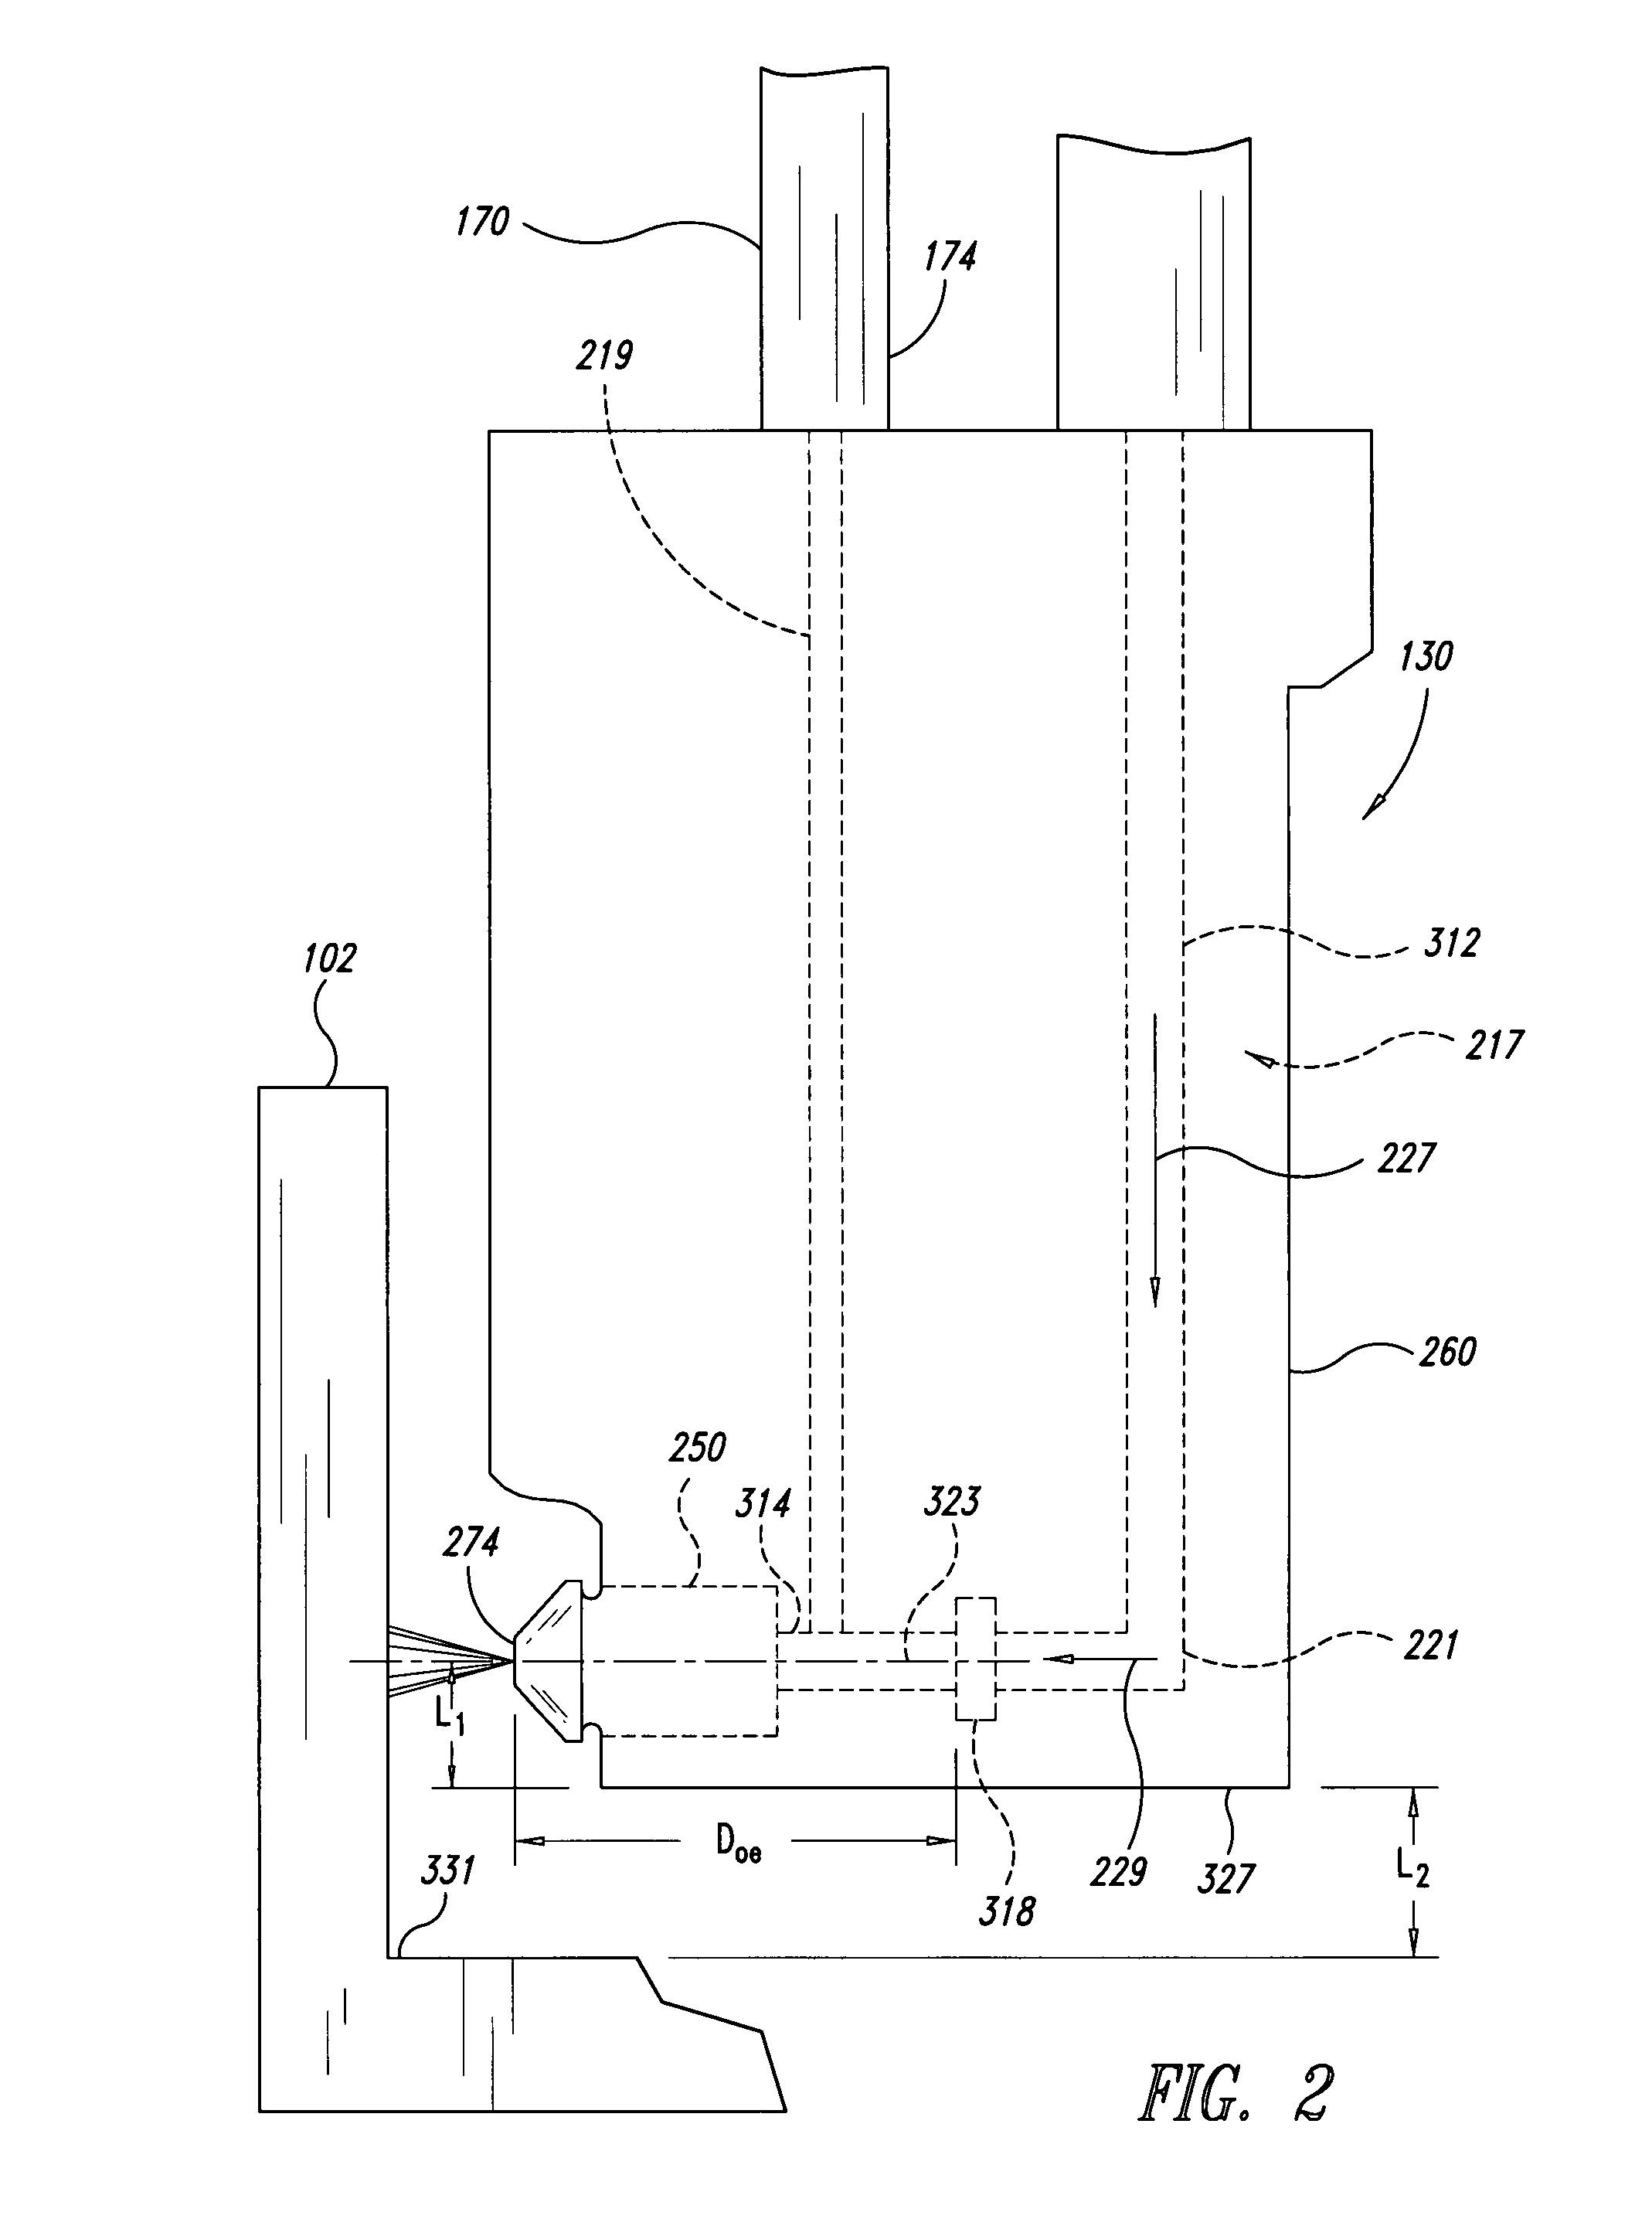 Apparatus and process for formation of laterally directed fluid jets